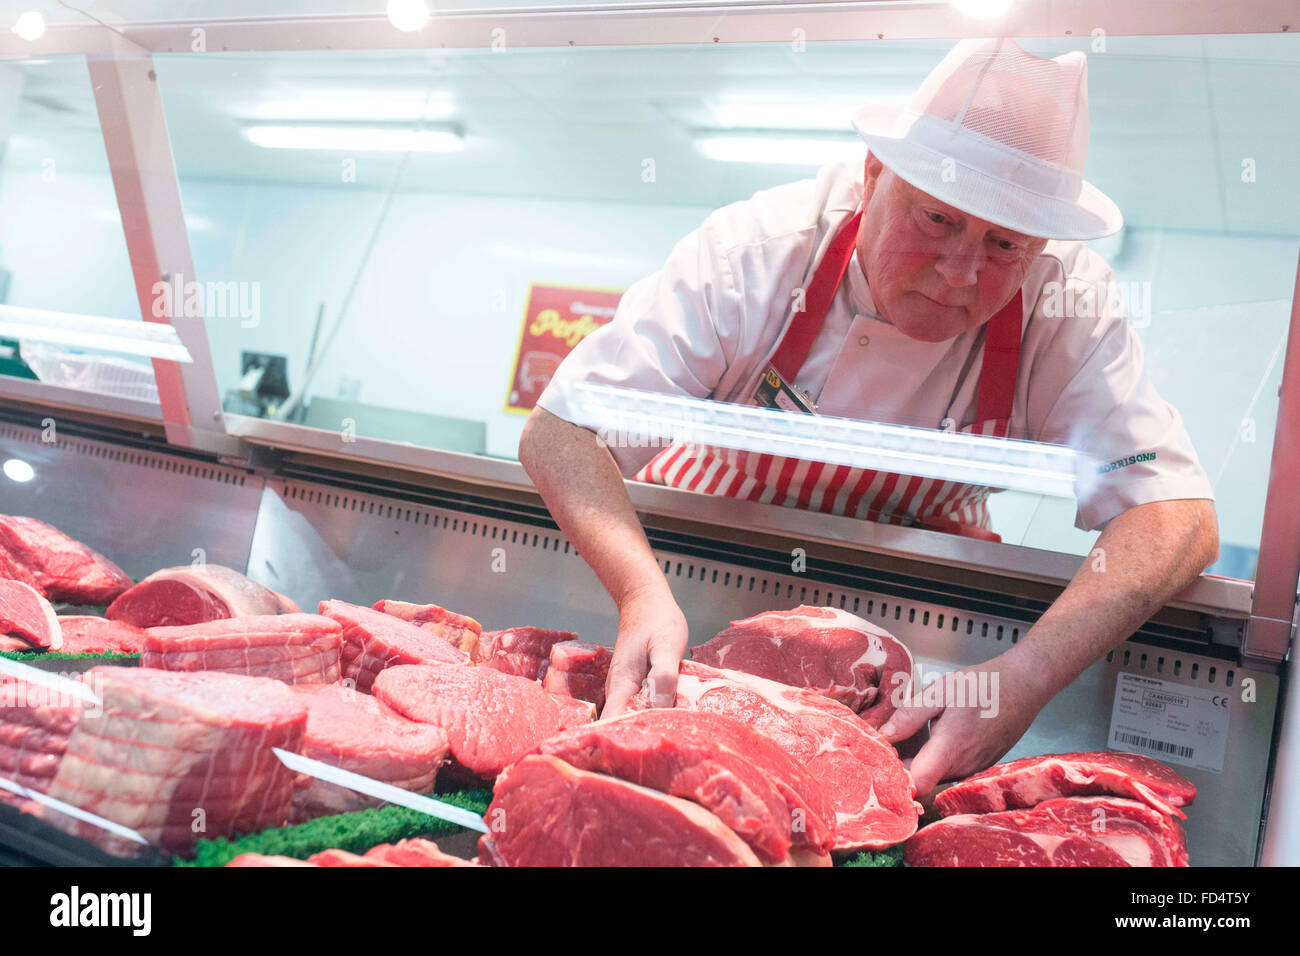 Morrisons supermarket. A man works on the butcher counter Stock Photo